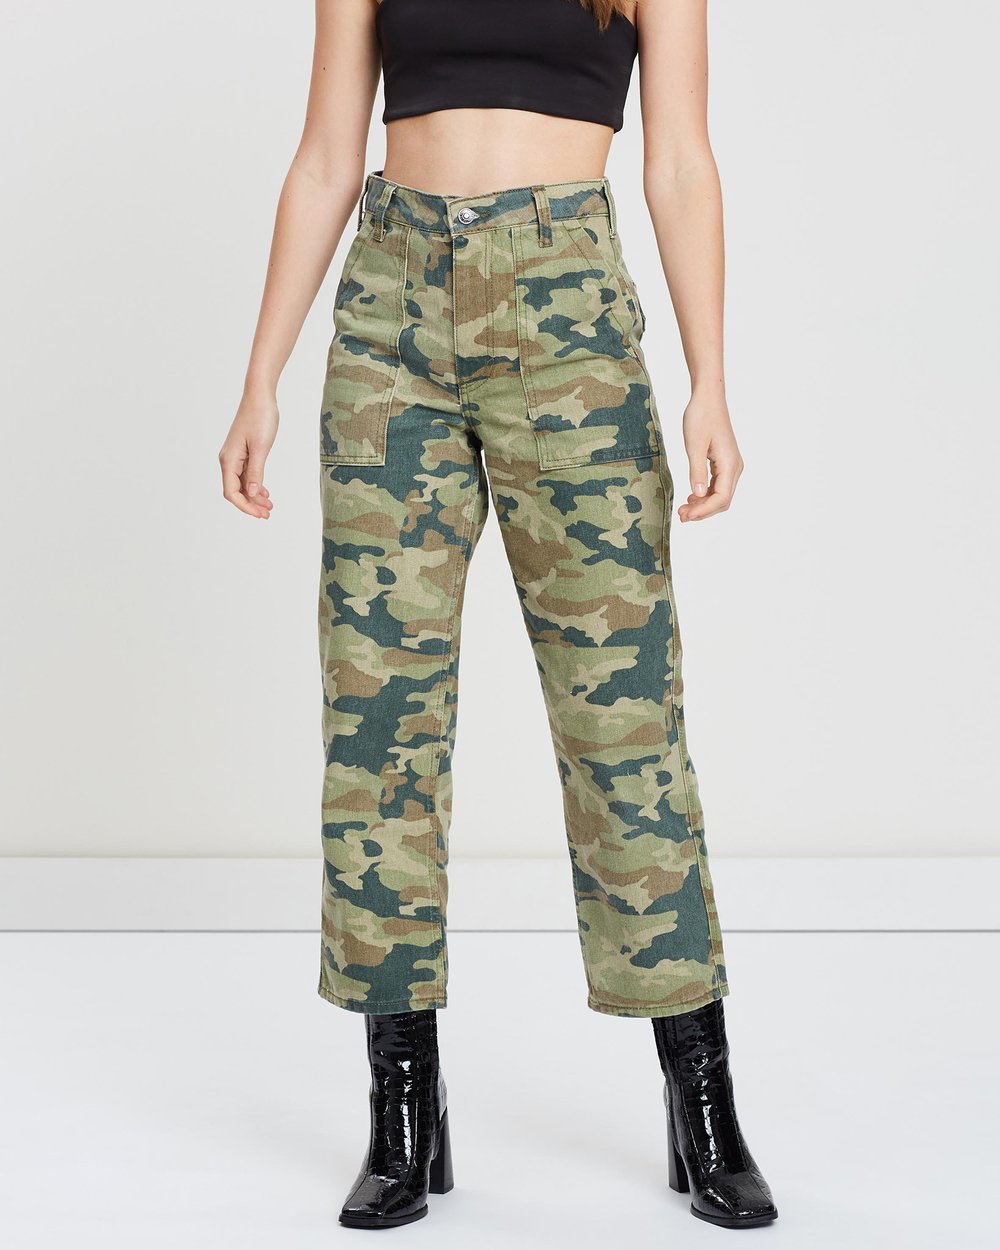 FREE PEOPLE: REMY CAMO CROPPED PANTS – 85 86 eightyfiveightysix